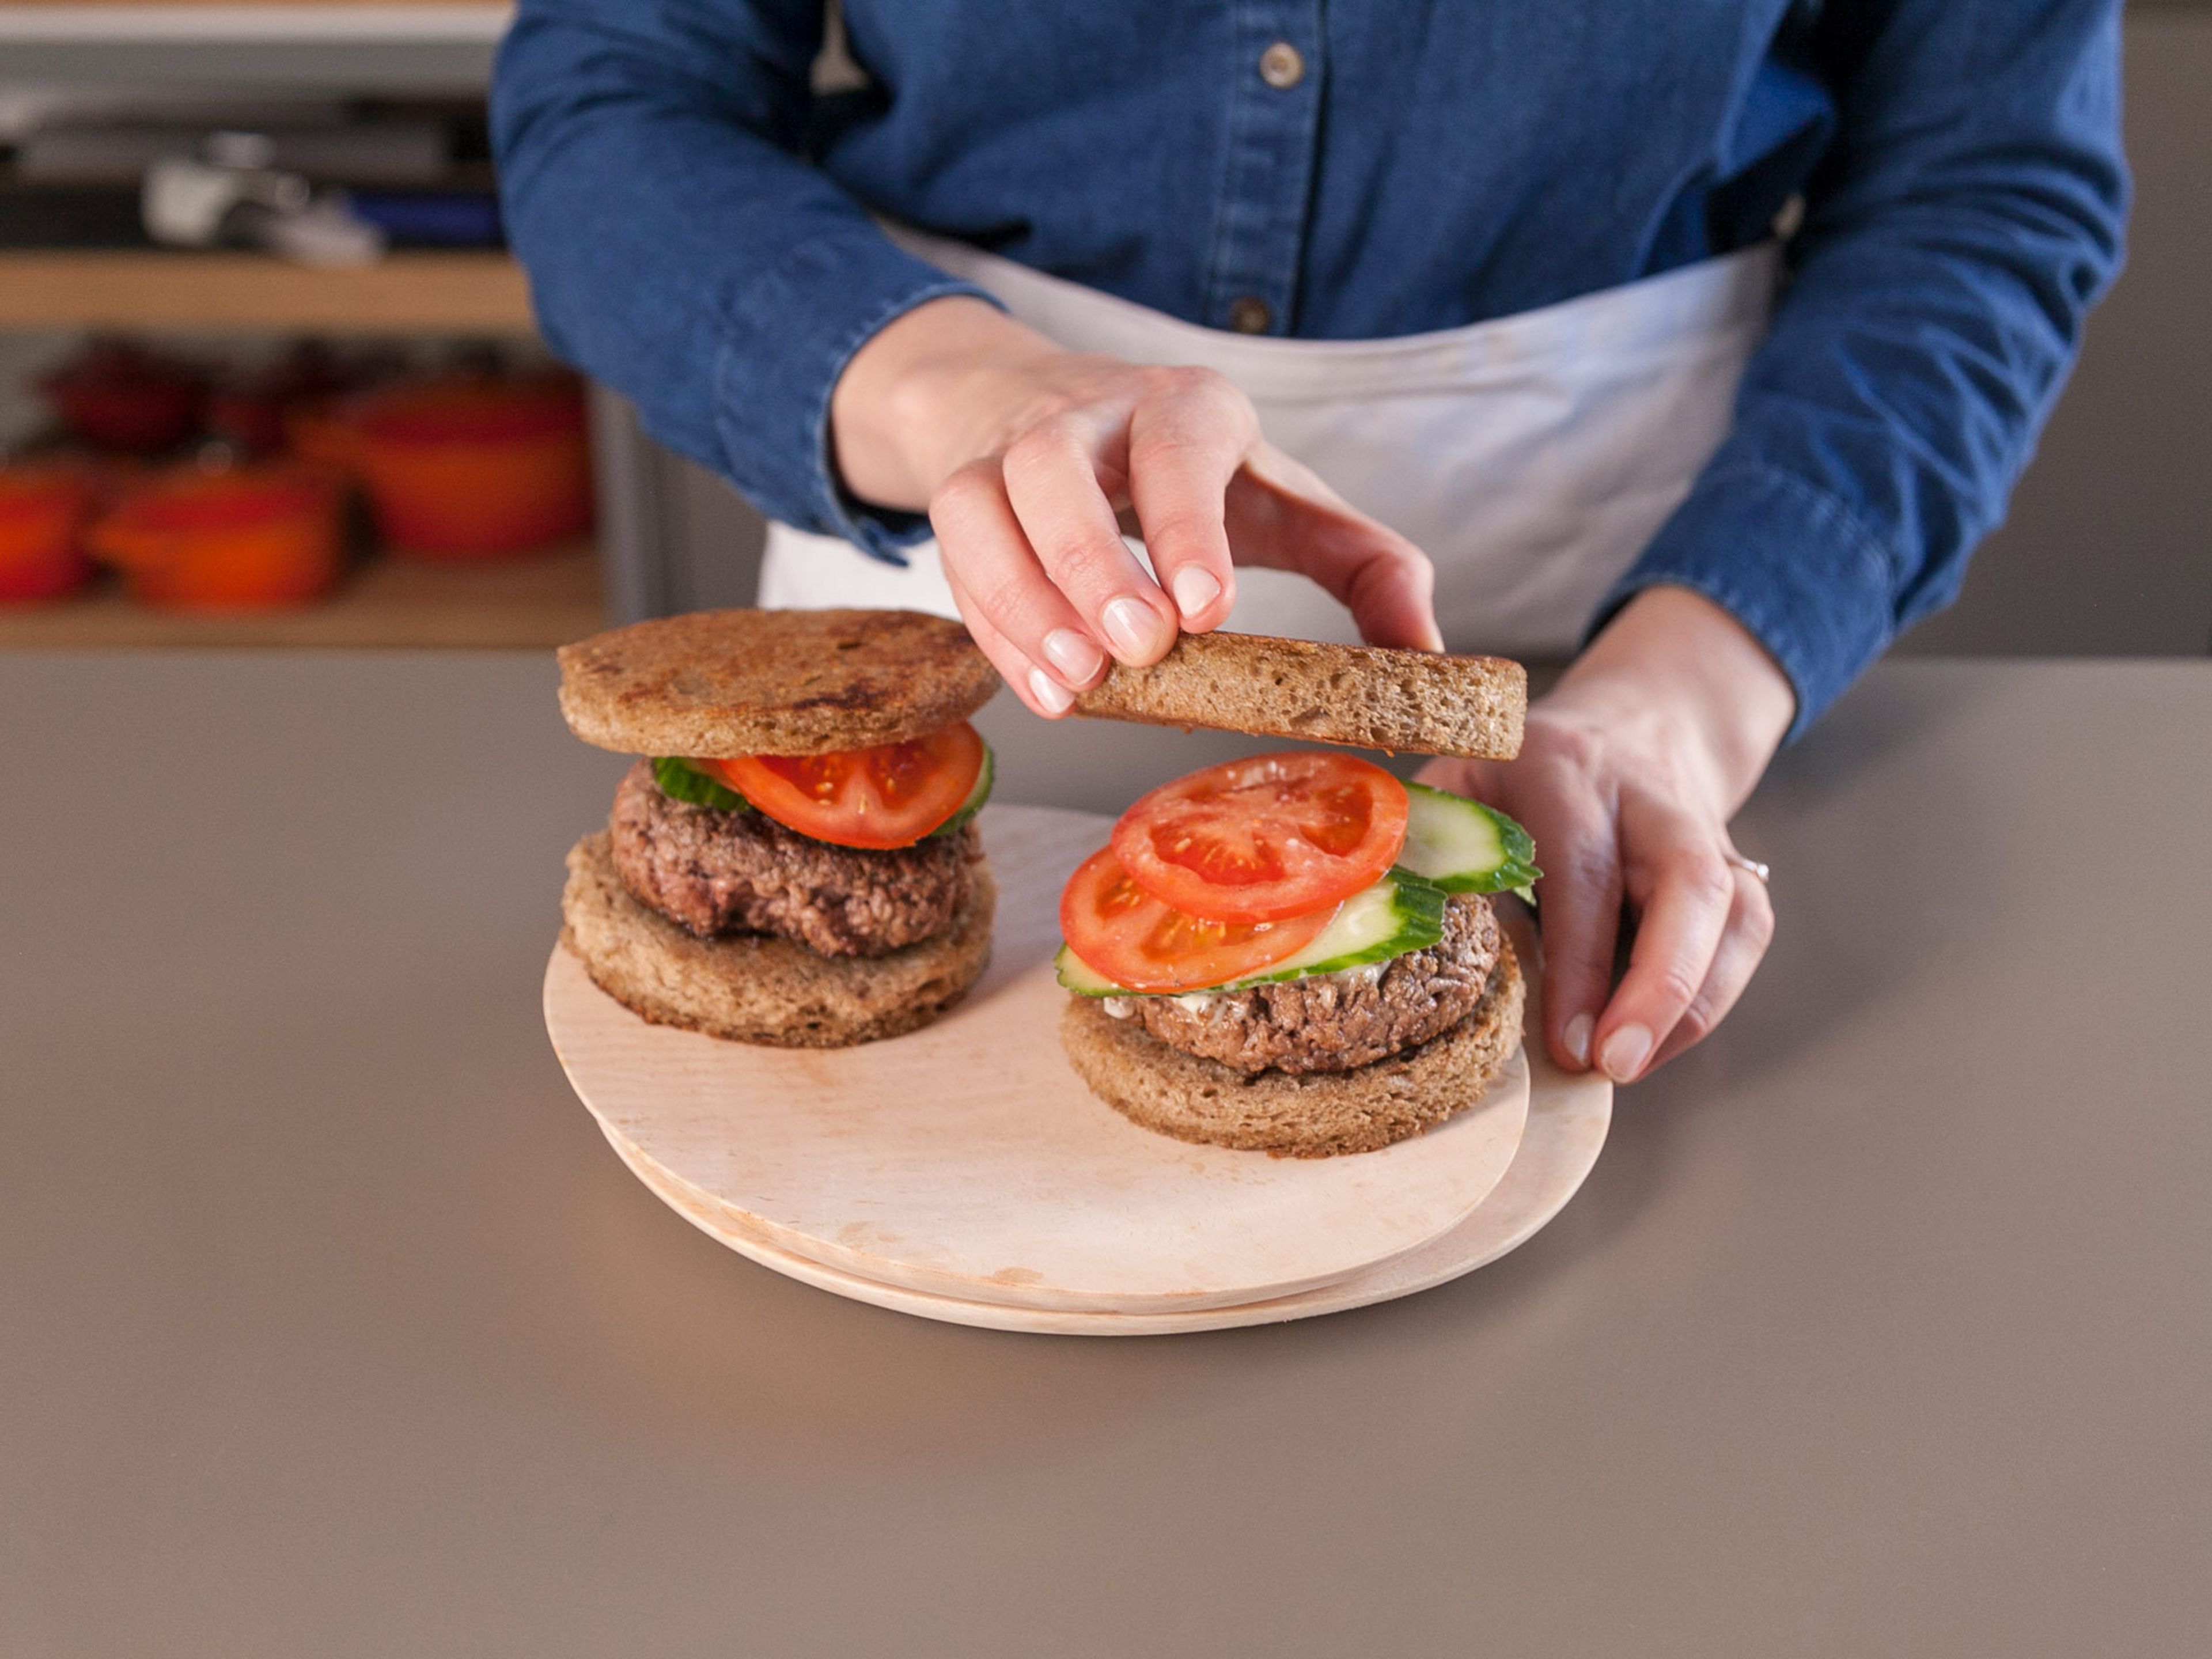 Top rye bread slices with mayonnaise, burger patties, and slices of tomato and cucumber. Enjoy!